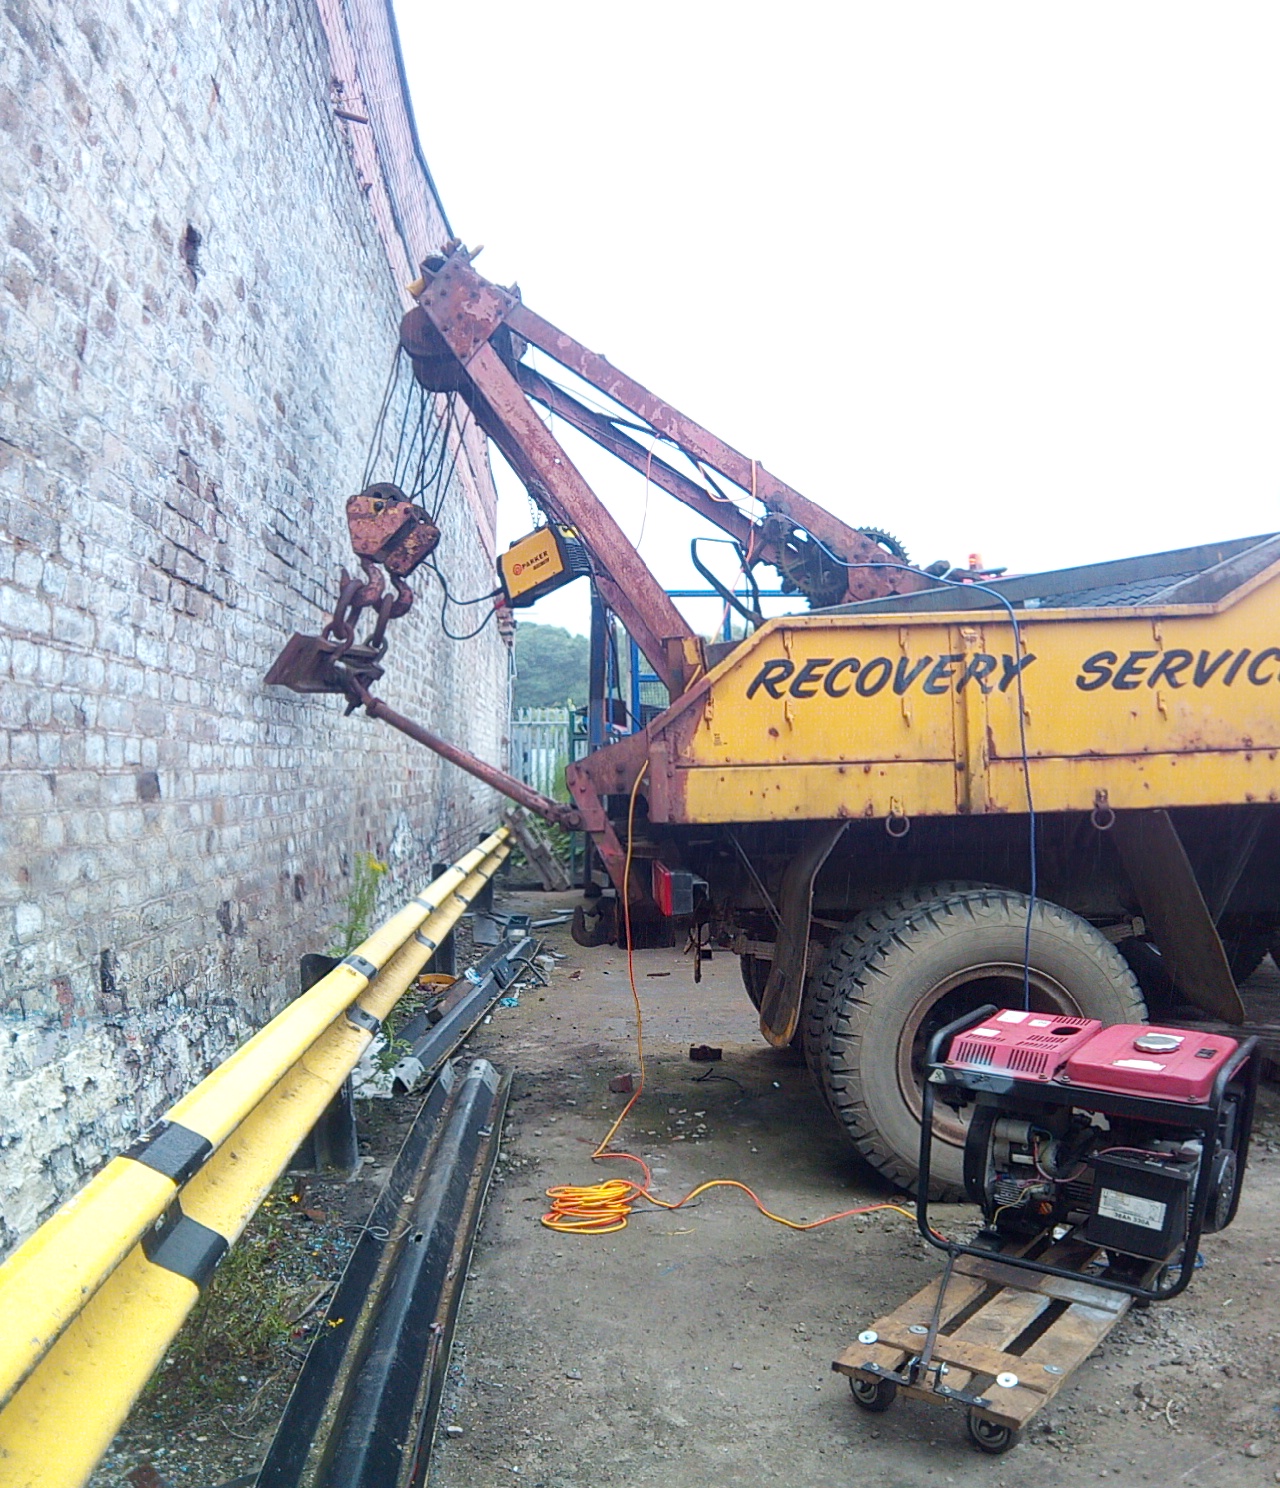 The truck backed up to a wall, with the recovery boom almost
touching said wall. A generator is set up in the foreground, and a
small stick welder is dangling from the boom by a length of chain.